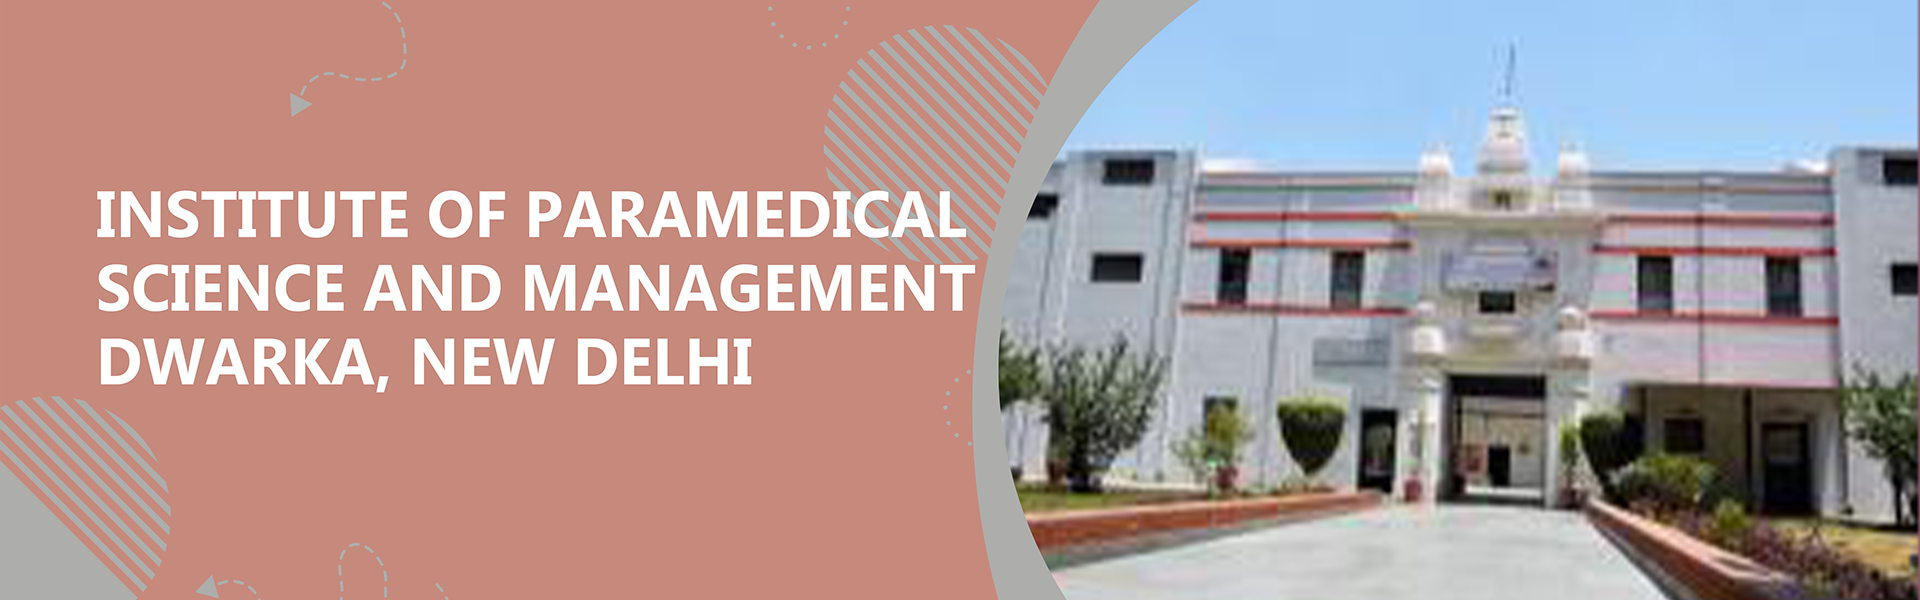 Institute Of Paramedical Science And Management, Dwarka, New Delhi